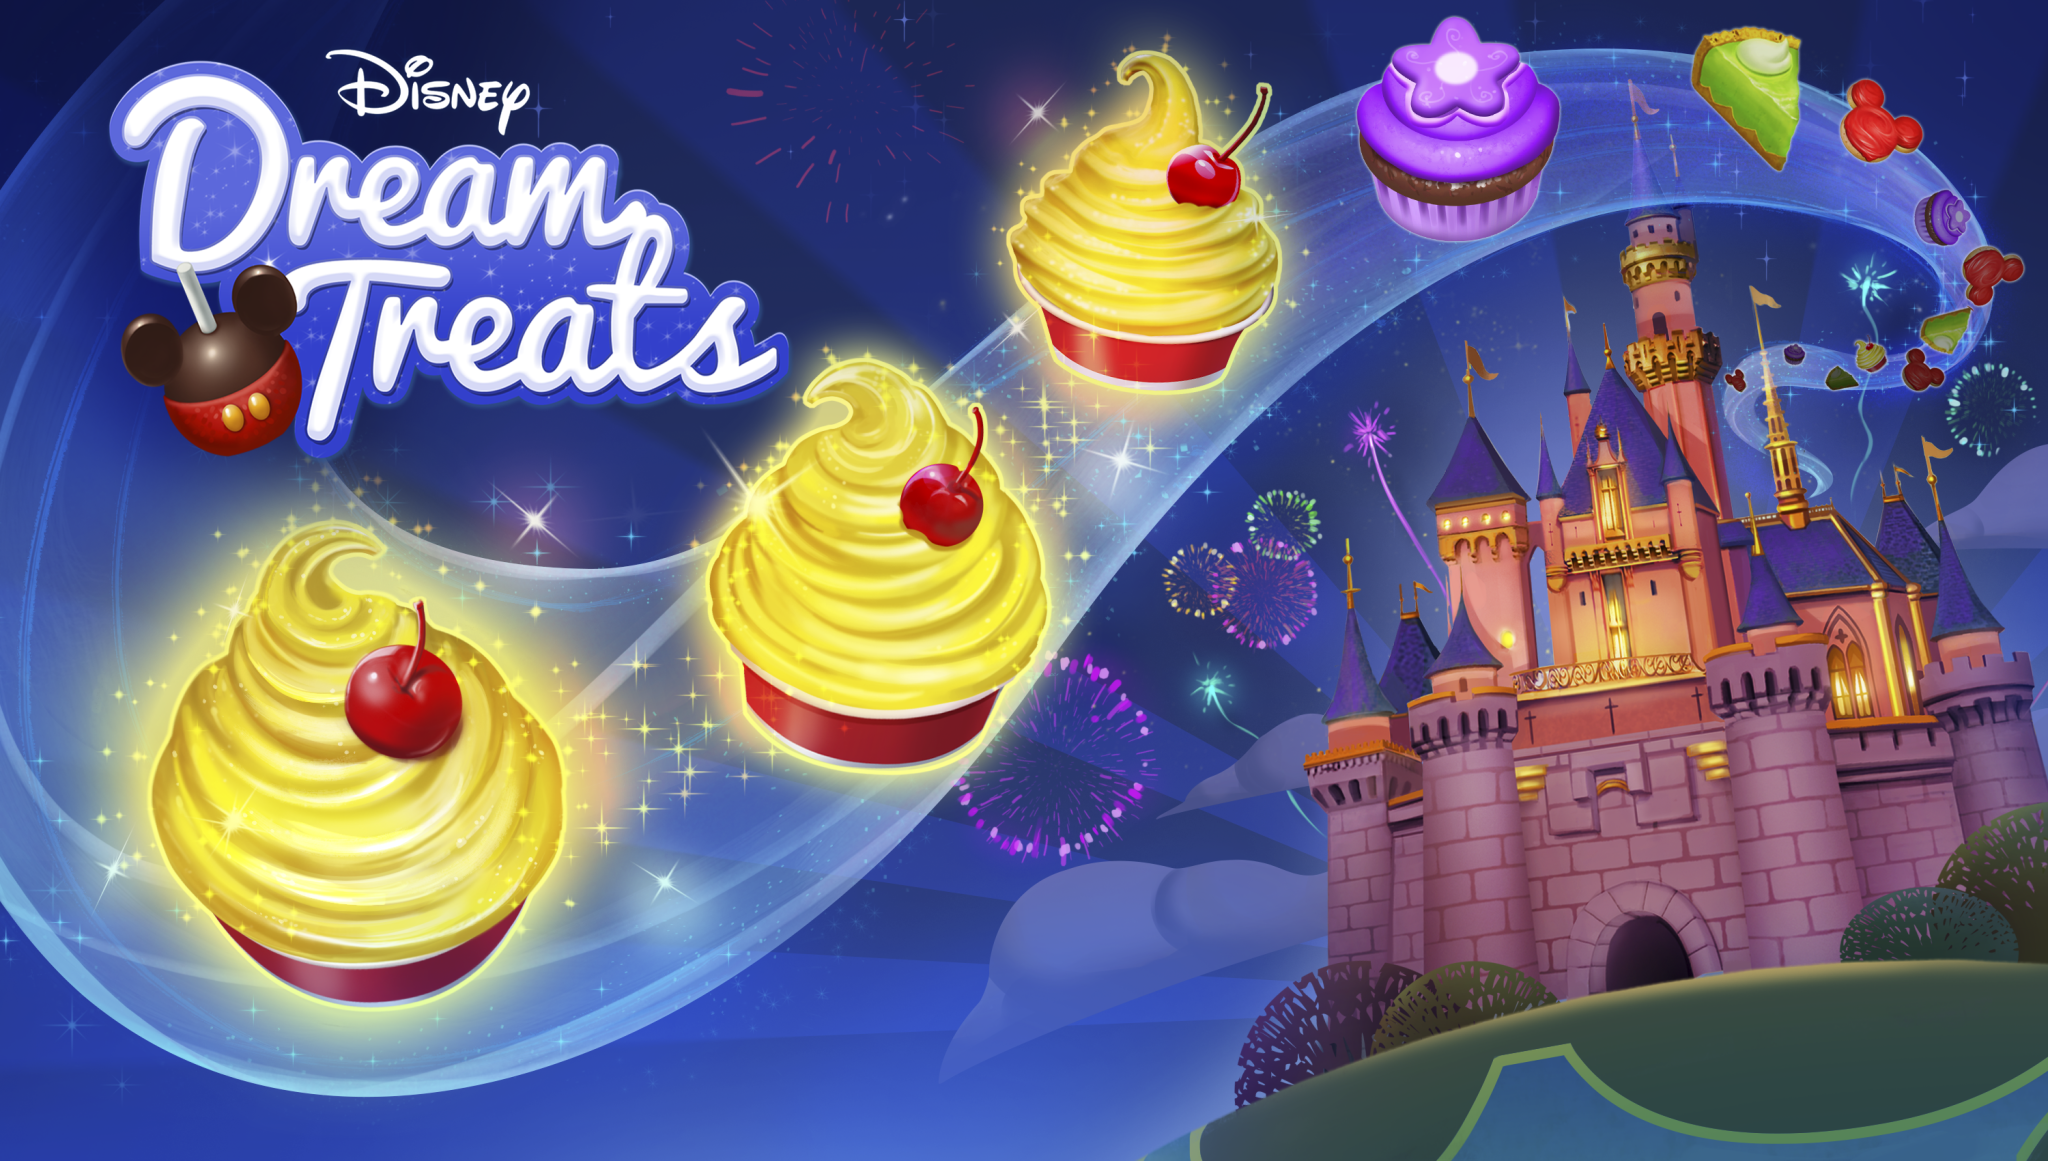 What’s This? Disney Dream Treats Adds Holiday Updates